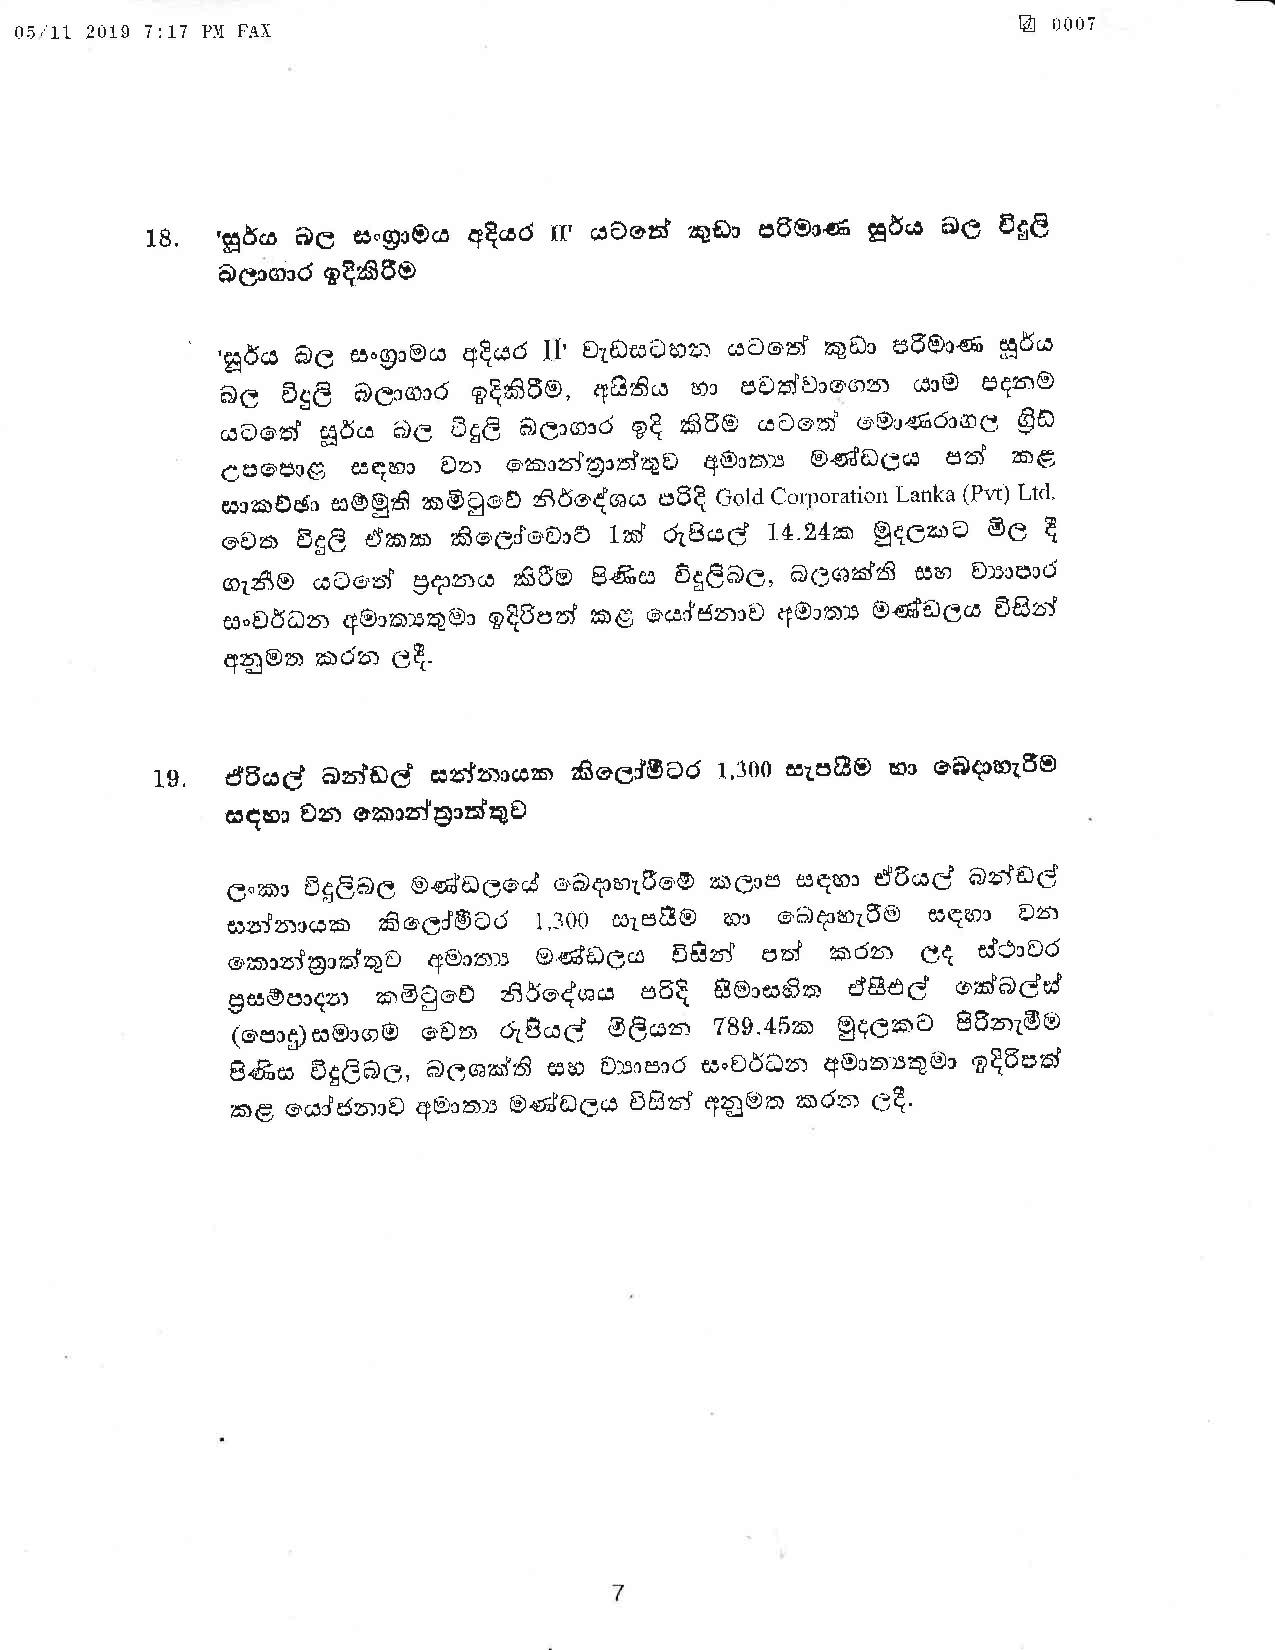 Cabinet Decision on 05.11.2019 page 007